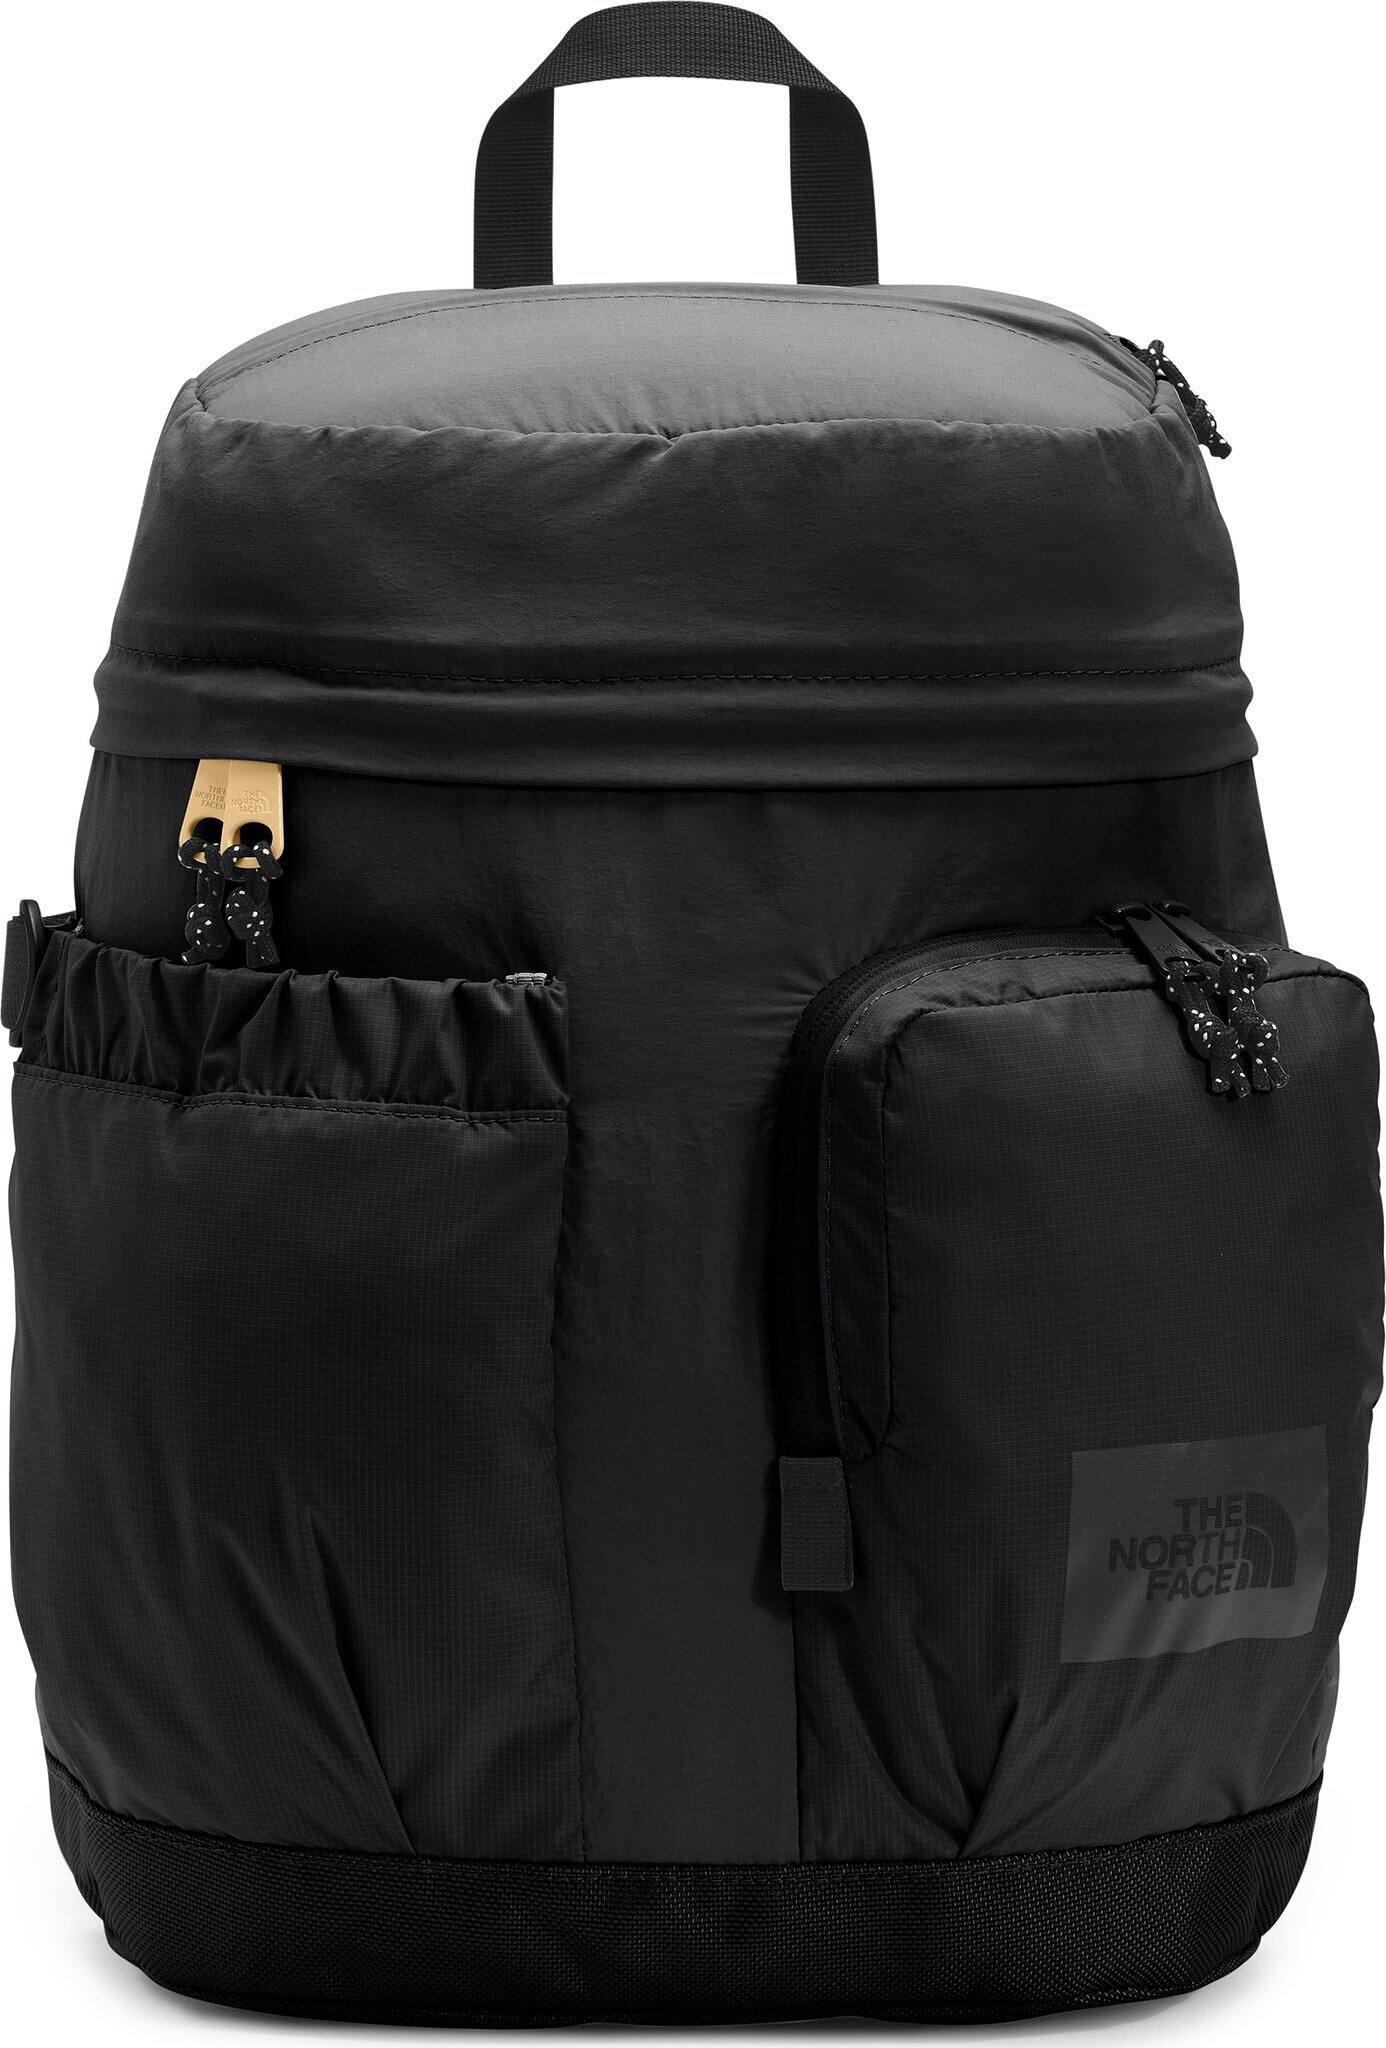 Product image for Mountain Daypack 18L